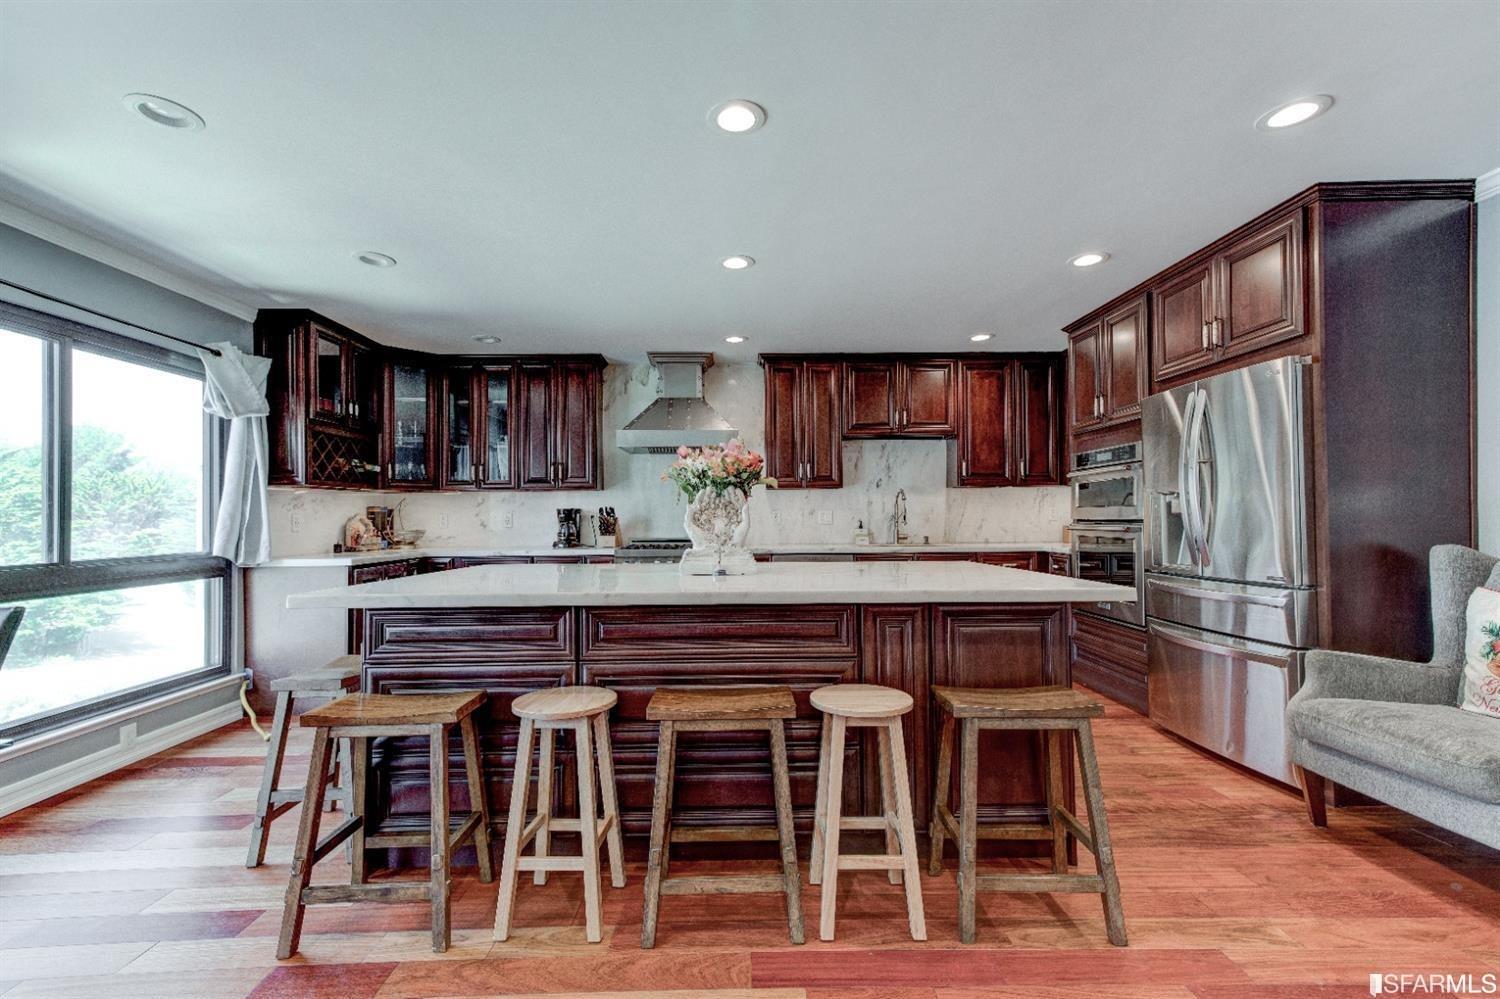 a kitchen with stainless steel appliances granite countertop a dining table chairs refrigerator and cabinets